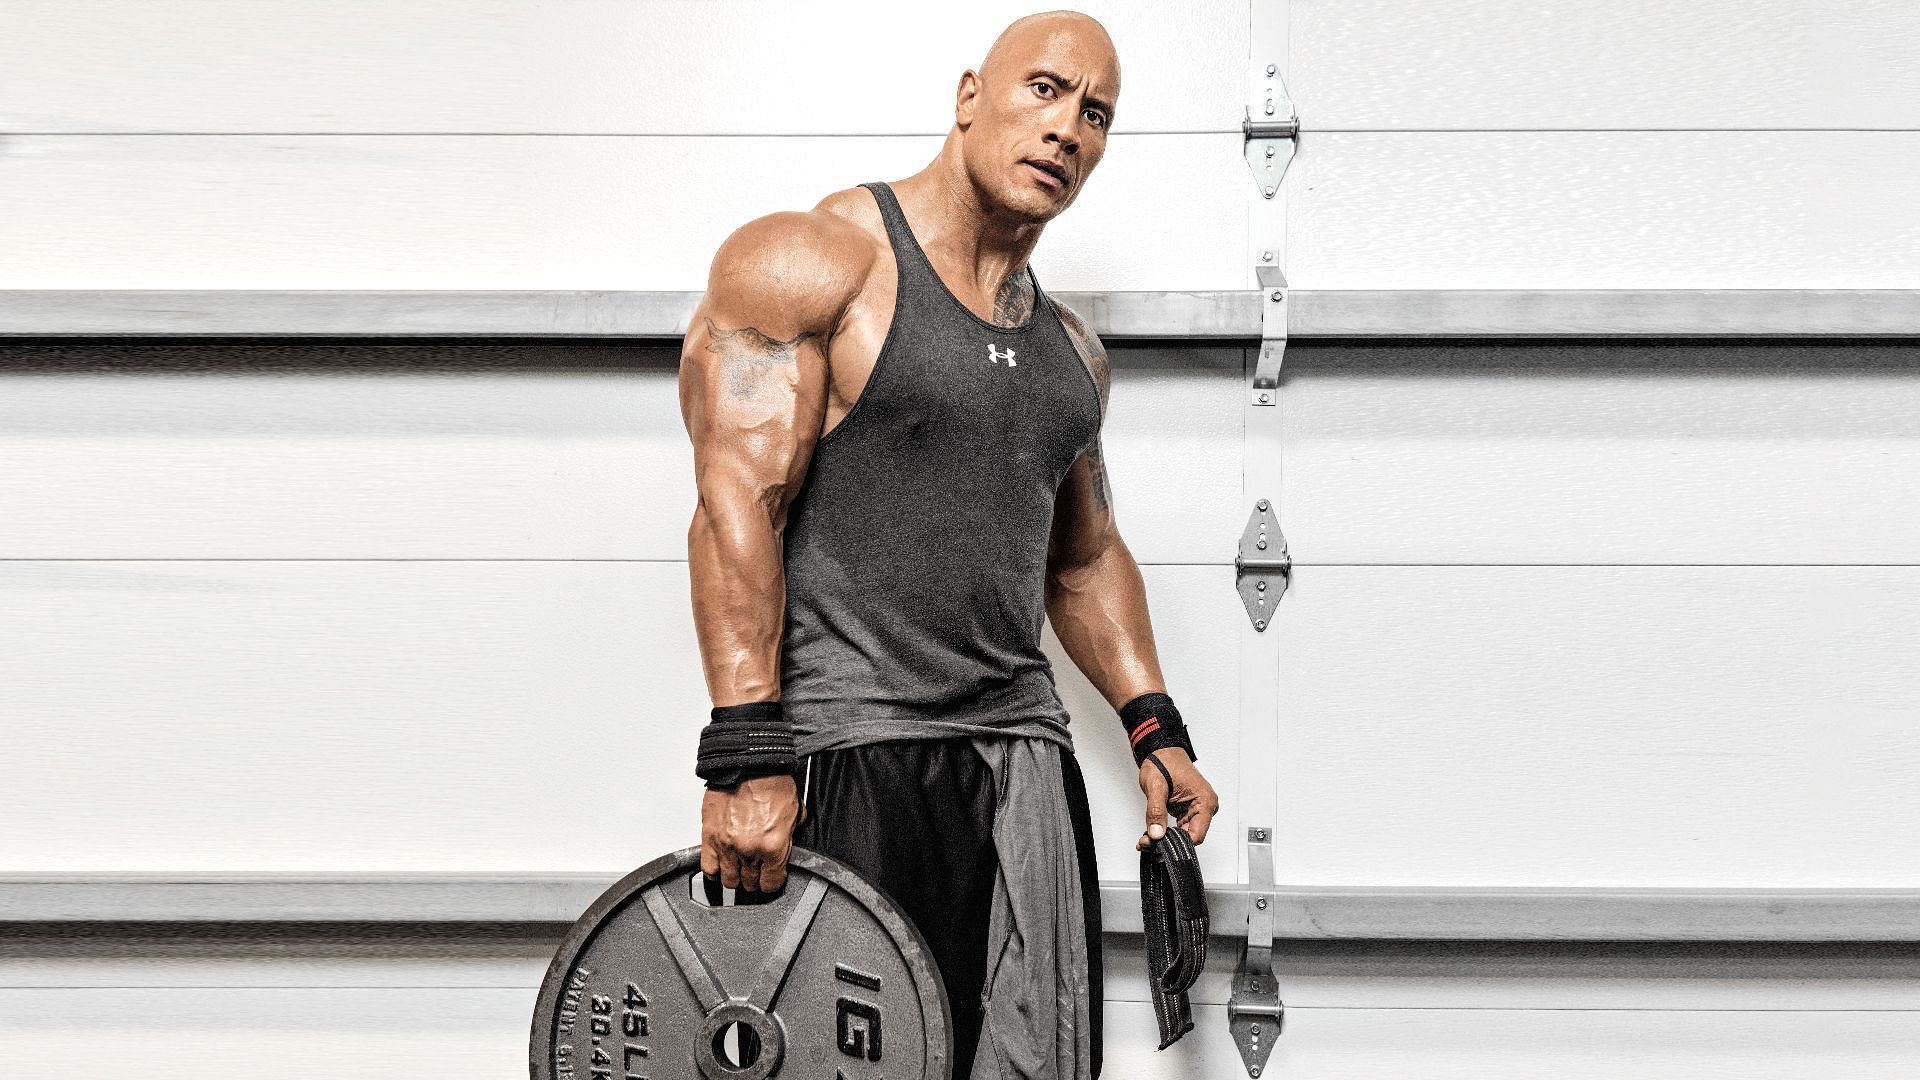 The rock workout routine. (Image via Wallpaperflare.com)